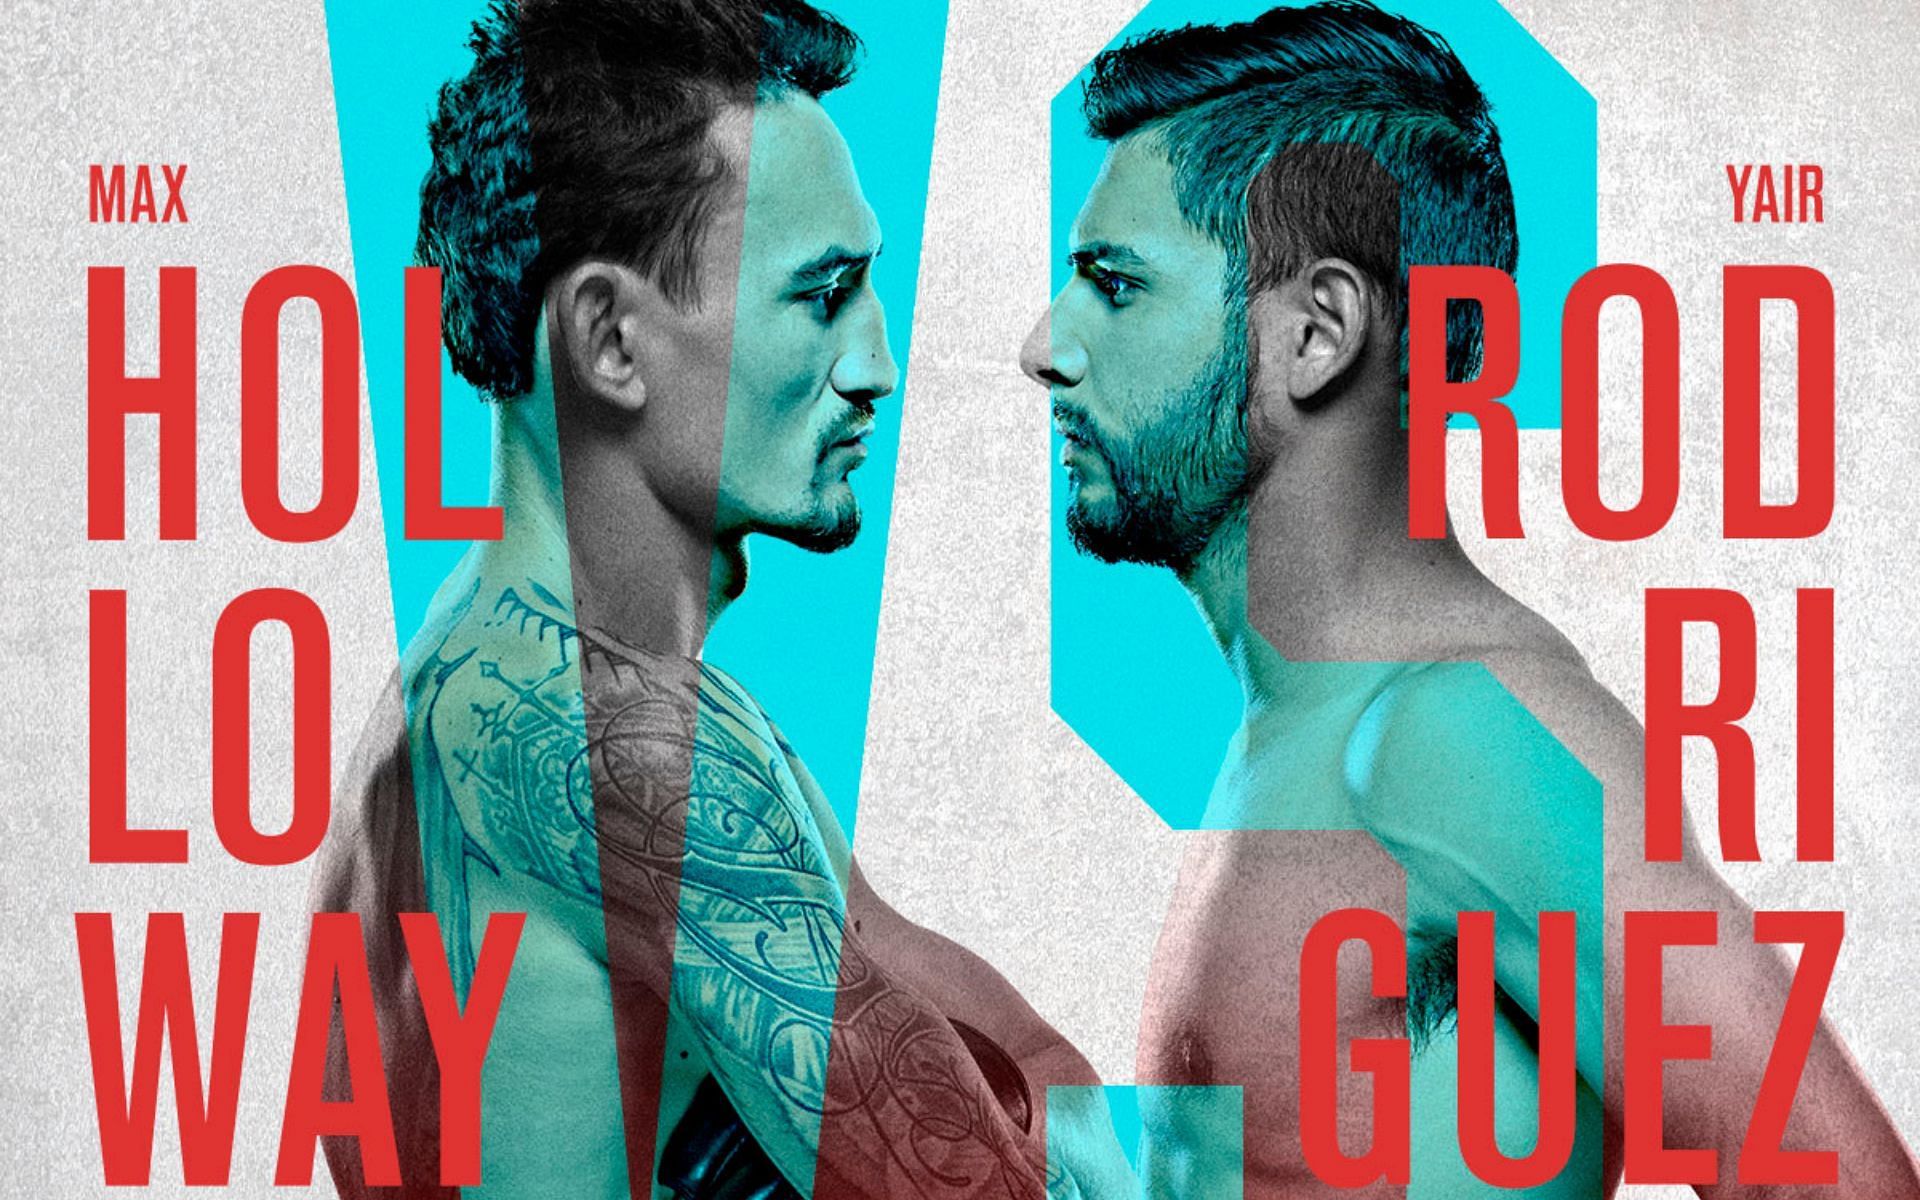 Max Holloway vs Yair Rodriguez official poster [Credits: @UFCEurope via Twitter]